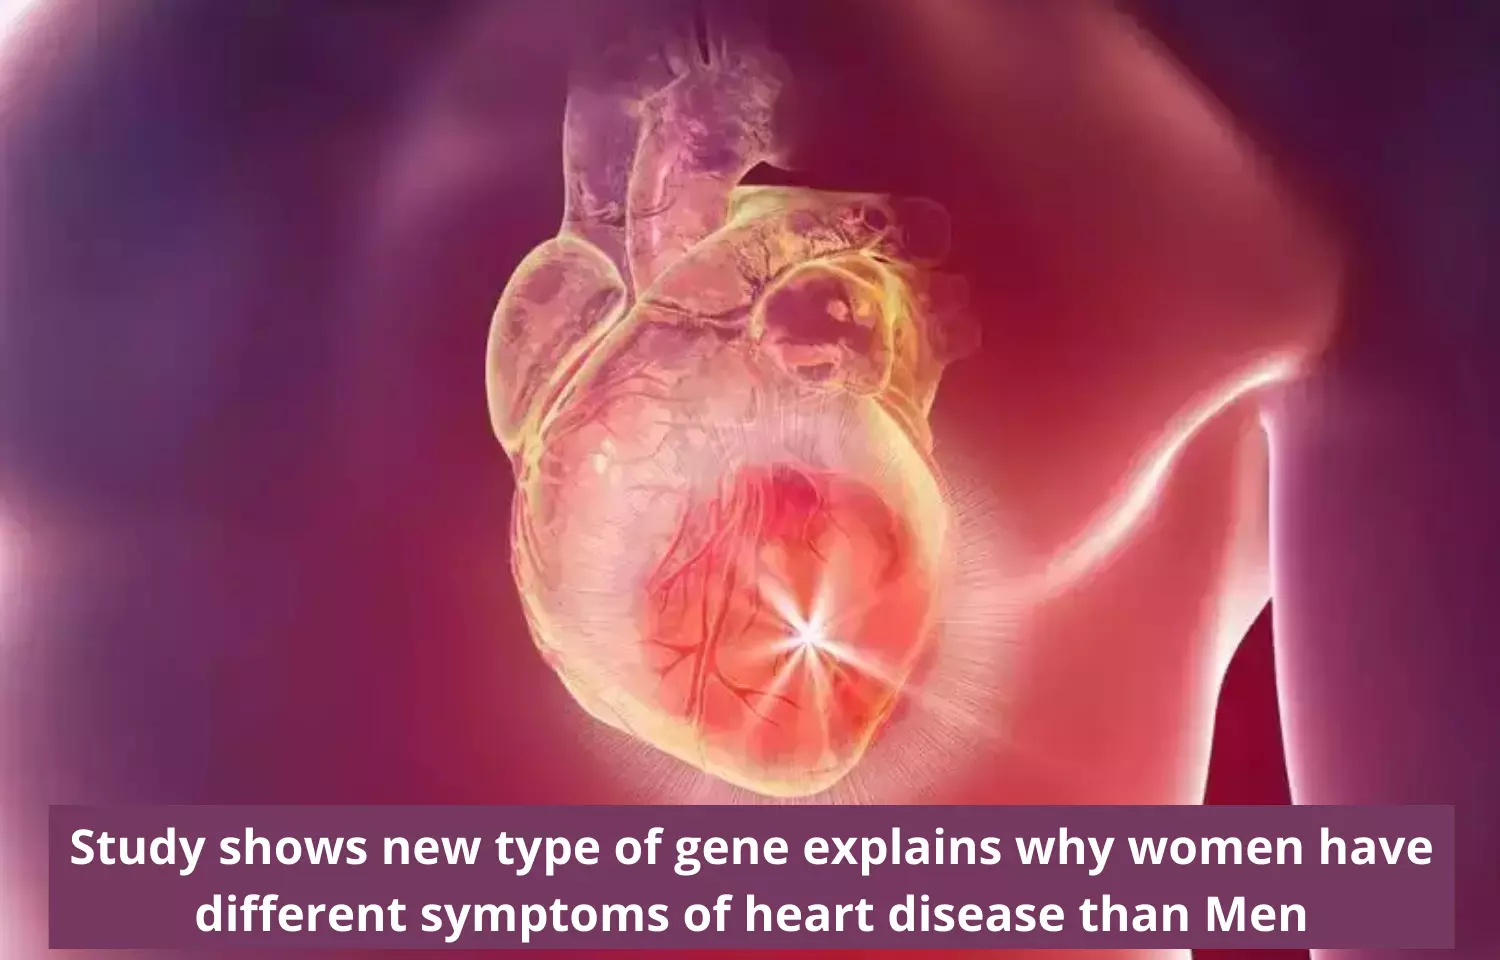 Study shows new type of gene that explains why women have different symptoms of heart disease than men